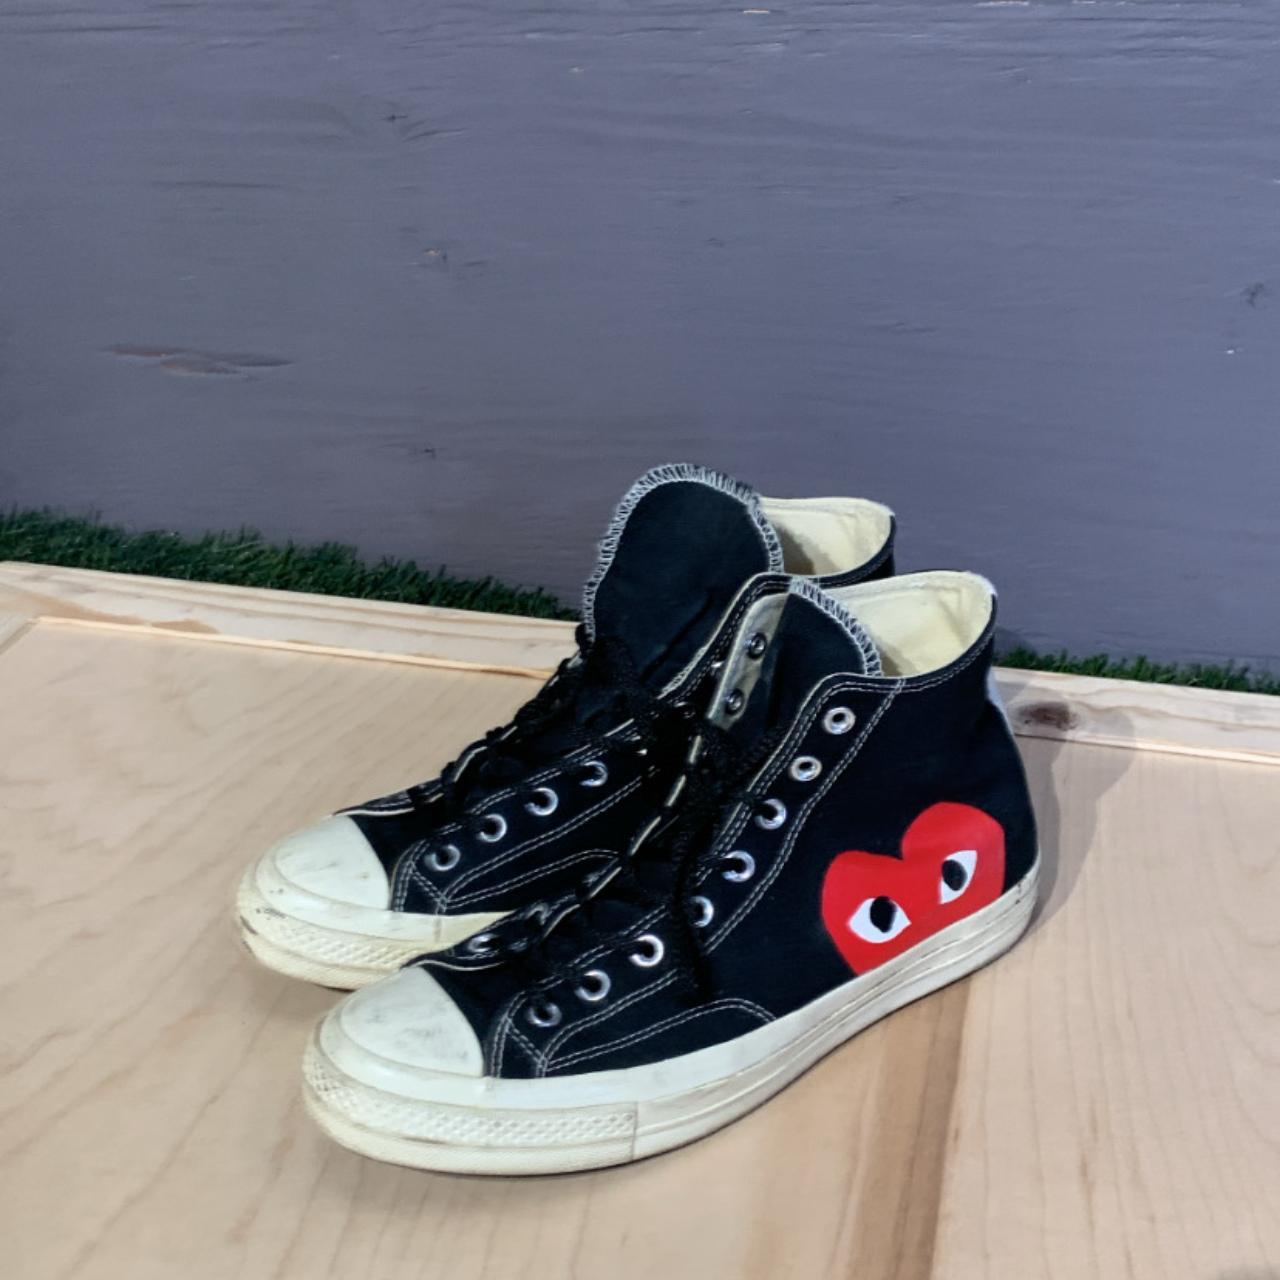 Comme des Garçons Play Men's Black and Red Trainers